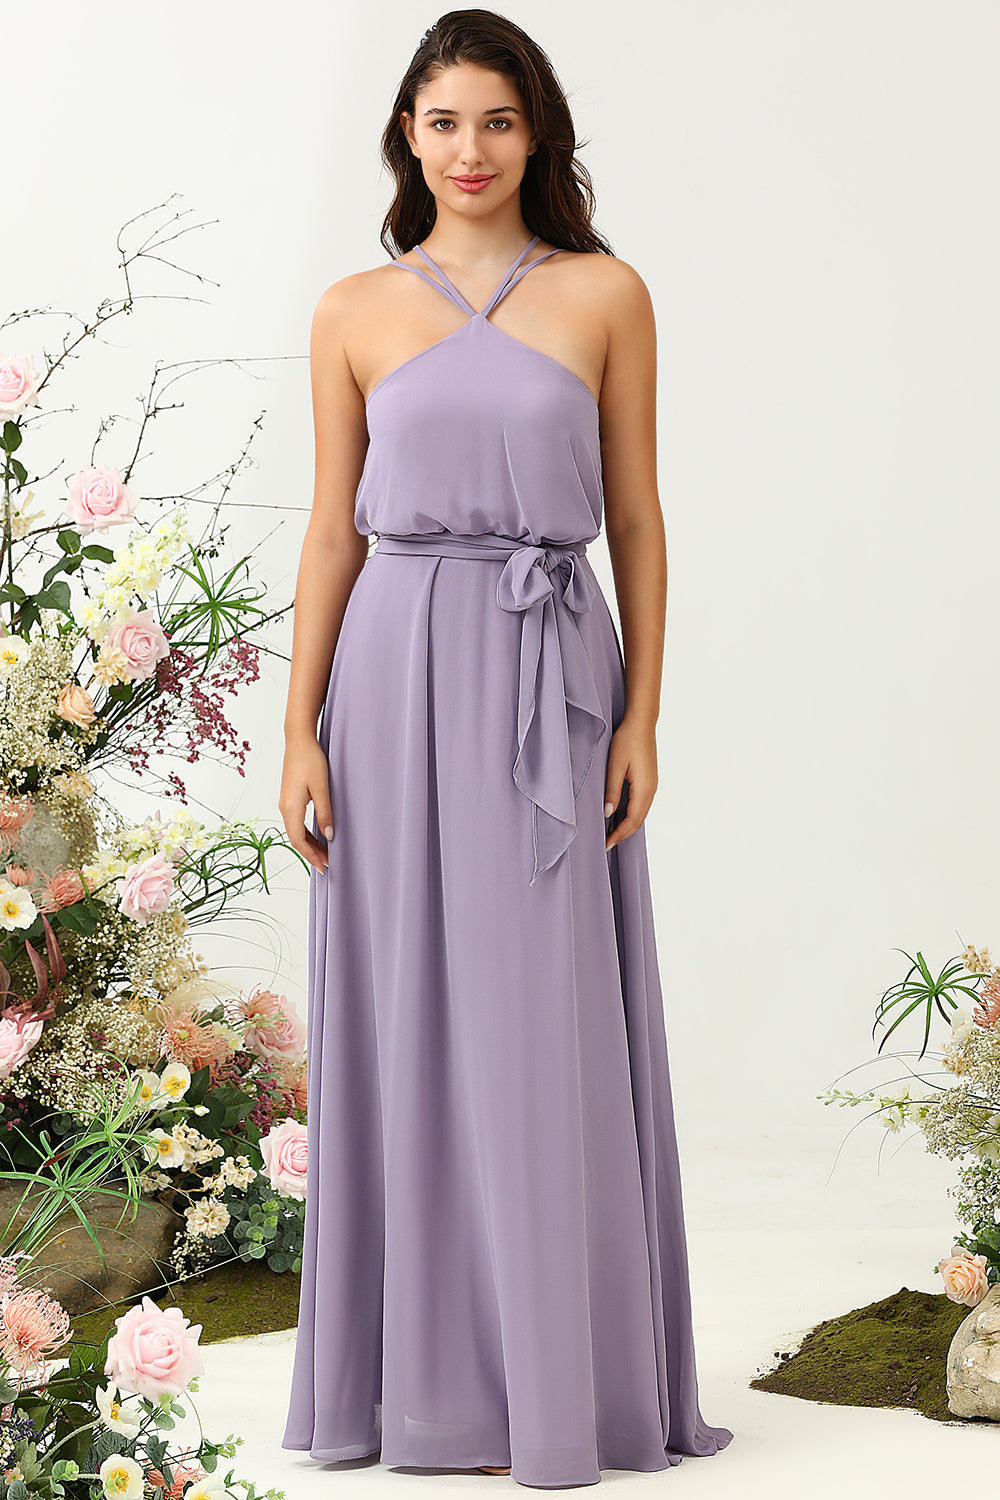 Grey Purple A Line Halter Long Bridesmaid Dress with Bowknot